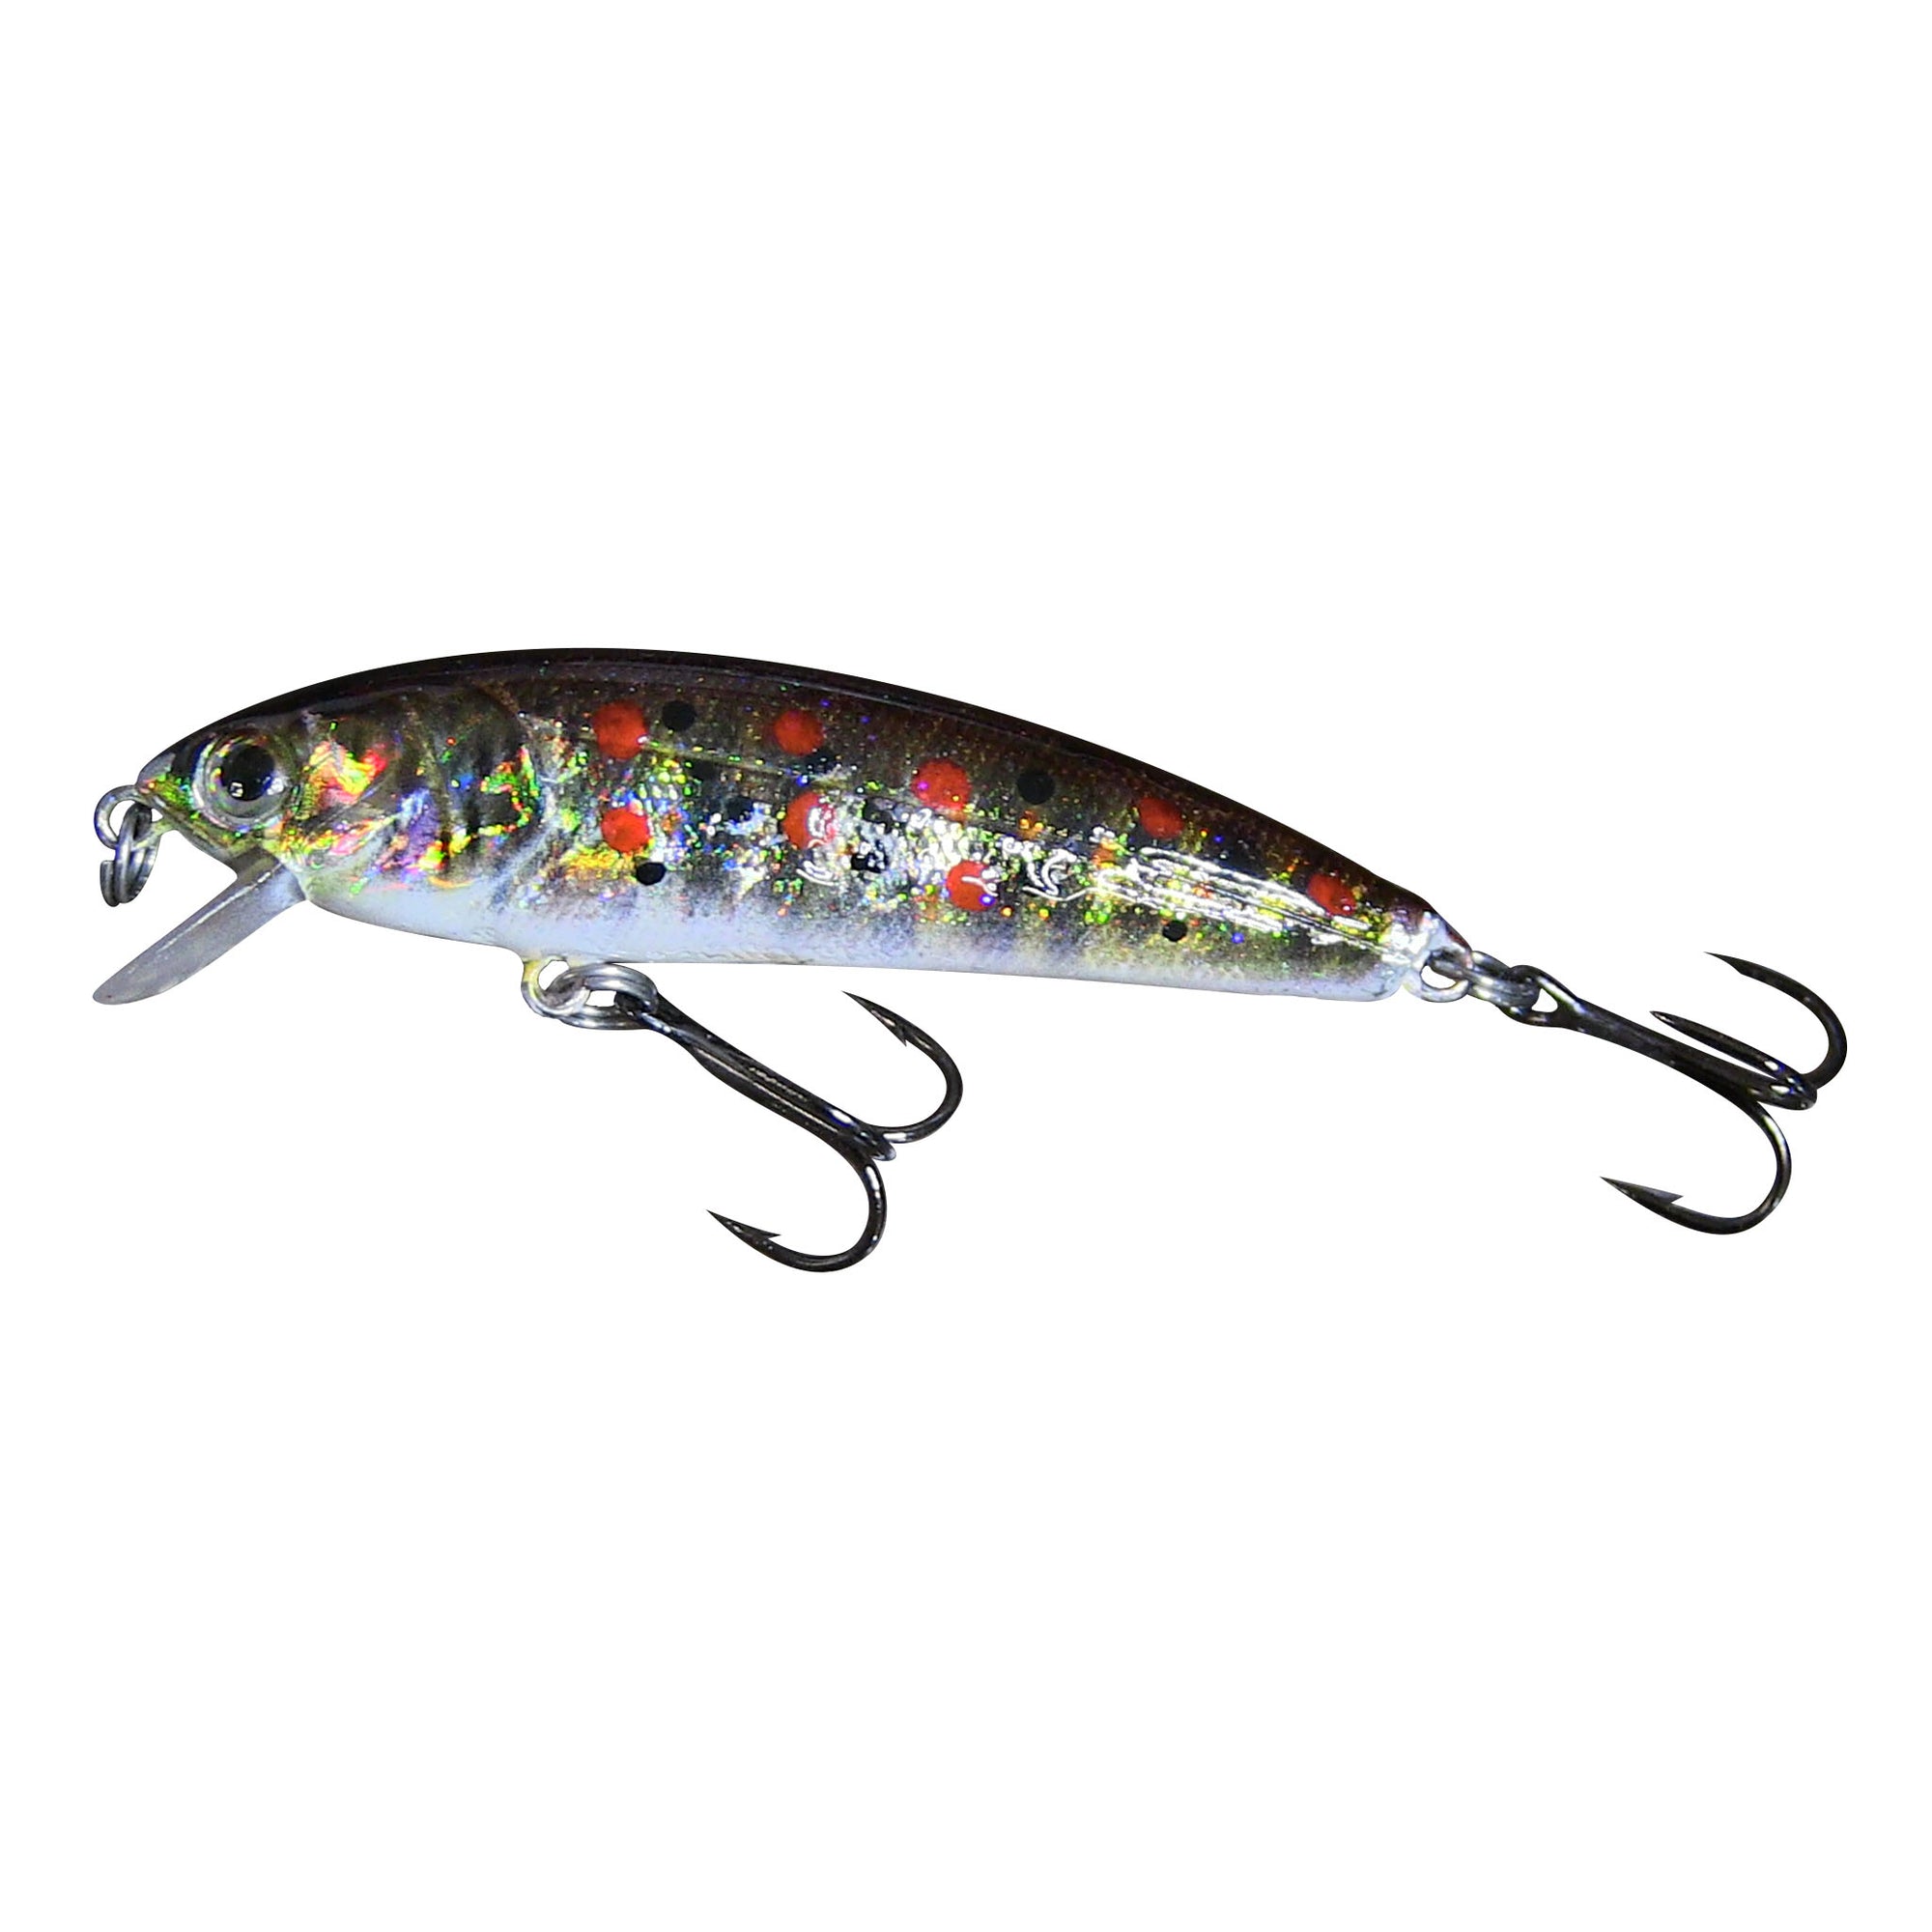 Baby Brown Trout Shallow Diver Live Bait Series - Reno Bait Company